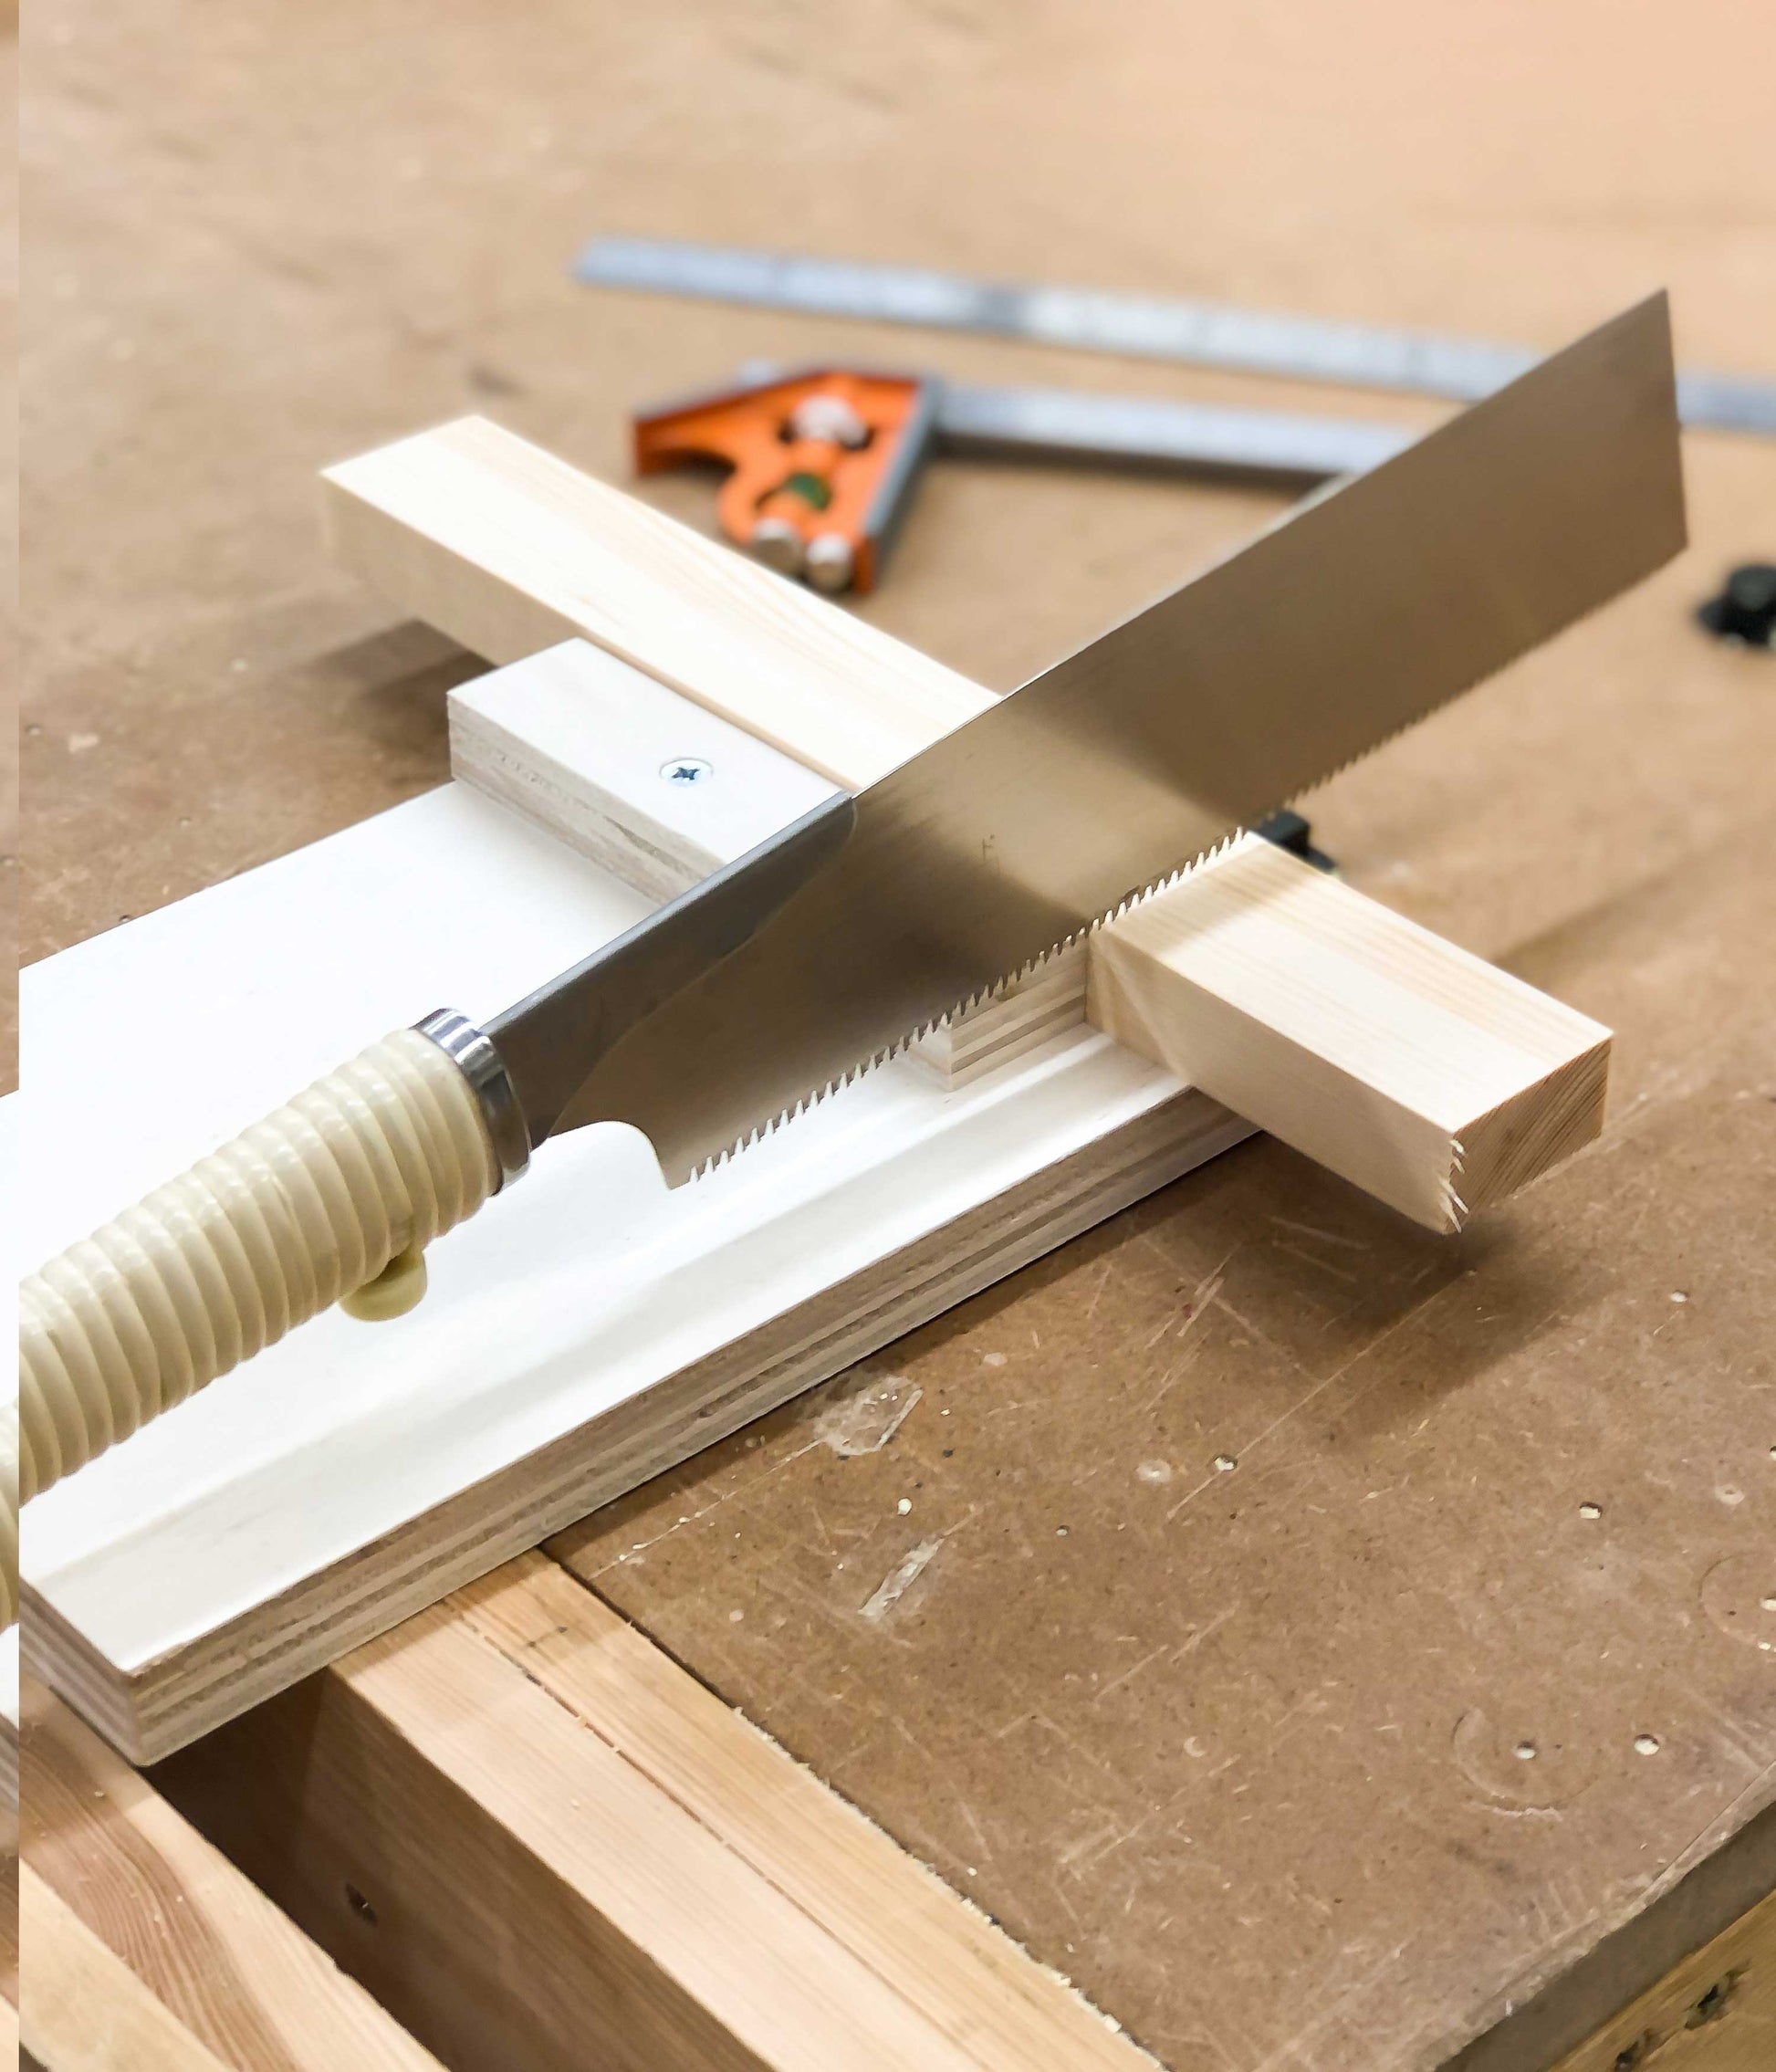 Introduction to DIY for teens and tweens. Learn how to use a Japanese saw, drill and other hand tools